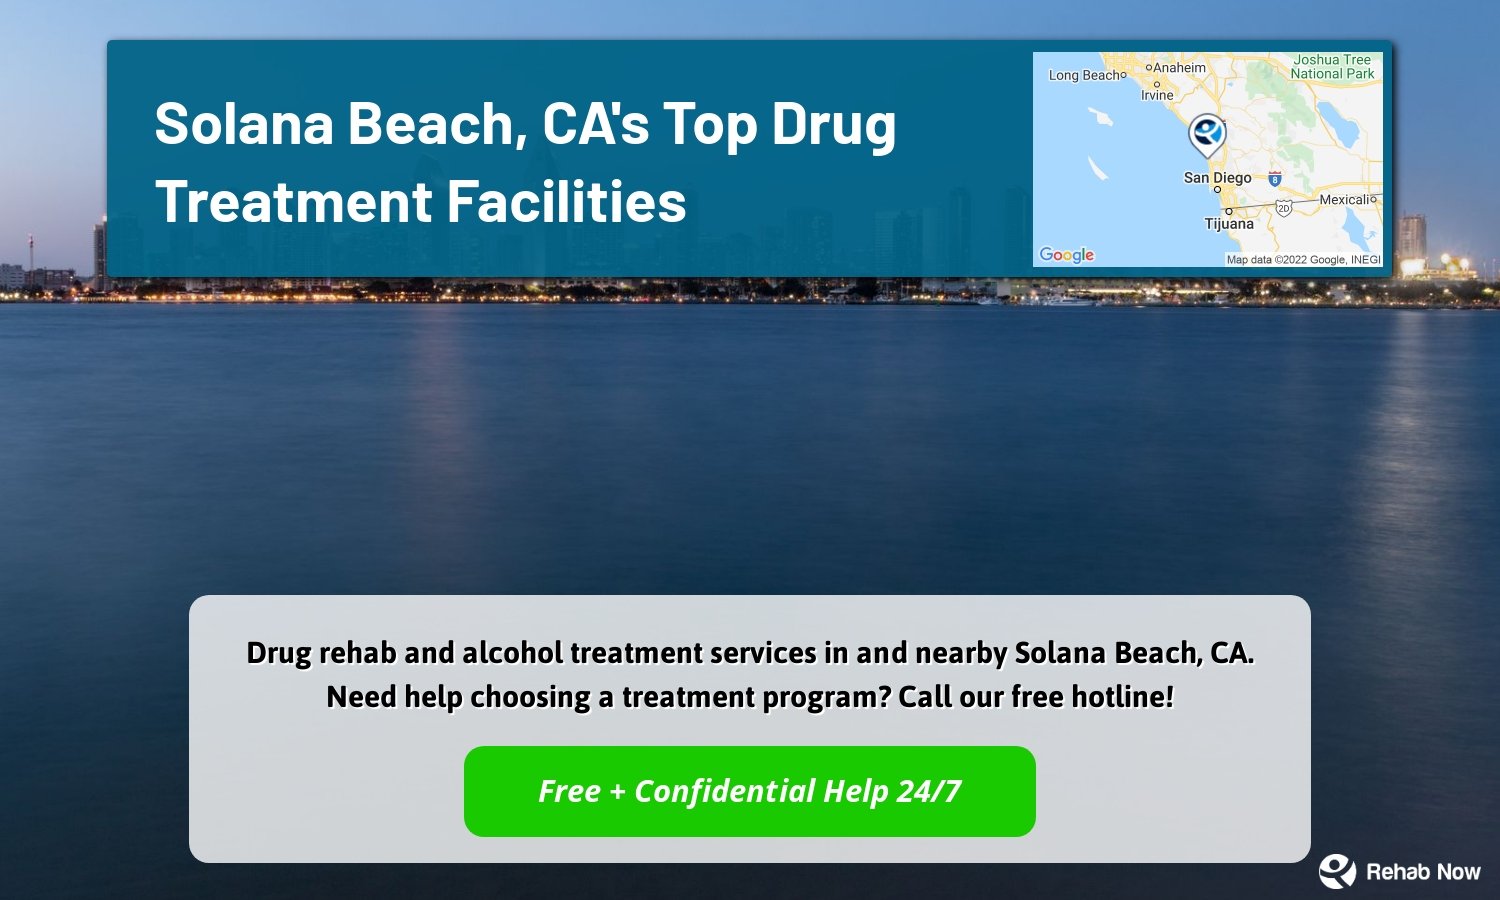 Drug rehab and alcohol treatment services in and nearby Solana Beach, CA. Need help choosing a treatment program? Call our free hotline!